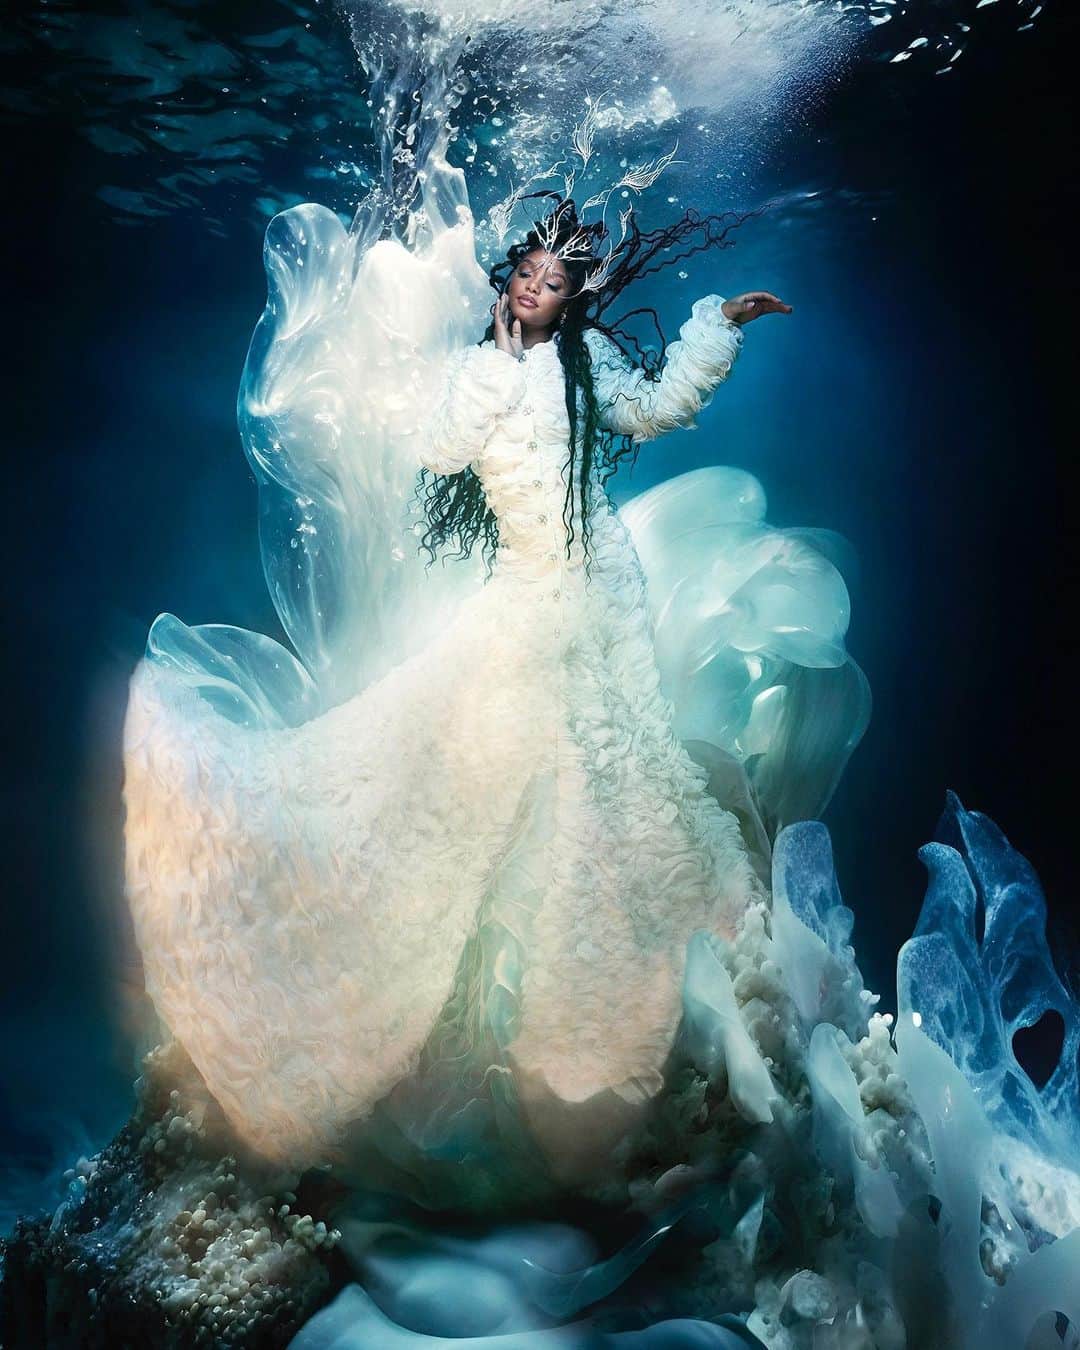 V Magazineさんのインスタグラム写真 - (V MagazineInstagram)「With the arrival of our V142 Summer 2023 issue, cover star @hallebailey fully transformed into an haute couture mermaid, all thanks to photographer @robrusling123—the English creative who tapped into AI technology to craft up the imaginative underwater world seen in Halle’s cover story. 🪸🐚🫧  To get more insight on the creative process of the shoot, V caught up with Rusling to chat about the magic of image making and the experience of shooting the cover, saying “When Anna and V came to me with the proposal to do the shoot with Halle for the cover, I really felt blessed. Halle’s casting for ‘The Little Mermaid’ is something which means an awful lot to so many people. To be part of immortalizing the history of this moment in some small way is very special to me and I wanted to make sure we made images that felt fantastical enough that young kids might want to tear out the pages and put them on their walls.”  Head to VMagazine.com to discover the full story + pre-order your copy of V142 at shop.vmagazine.com.  – From V142 Summer 2023 Issue Photography: @RobRusling123 Fashion: @AnnaTrevelyan Interview: @MathiasRosenzweig Editor-In-Chief / Creative Direction: #StephenGan Makeup: @beautybychrisc Hair: @sparkyourhair Manicure: @ThuybNguyen Ai Artist: @Nik_Gundersen Art Direction: @tobiasholzmann Fashion Editor: @emmaoleck Editors: @overlyopinionatedblackperson / @kalaherh Casting: @itboygregk (@gkldprojects) Set Design: @olivia.giles.set.design Executive Production: @johnny_pascucci / @photobombproduction Special Thanks: @yvettenoelschure  Halle Wears Dress @Chanelofficial Haute Couture / High Jewelry Necklace @Bulgari (In Platinum With Pavé-Set Diamonds) / High Jewelry Serpenti Earrings #Bulgari (In White Gold With Brilliant Cut And Pavé-Set Diamonds) / Headpiece @lance.v.moore   [V142 hits newsstands globally beginning May 4]」4月28日 3時13分 - vmagazine